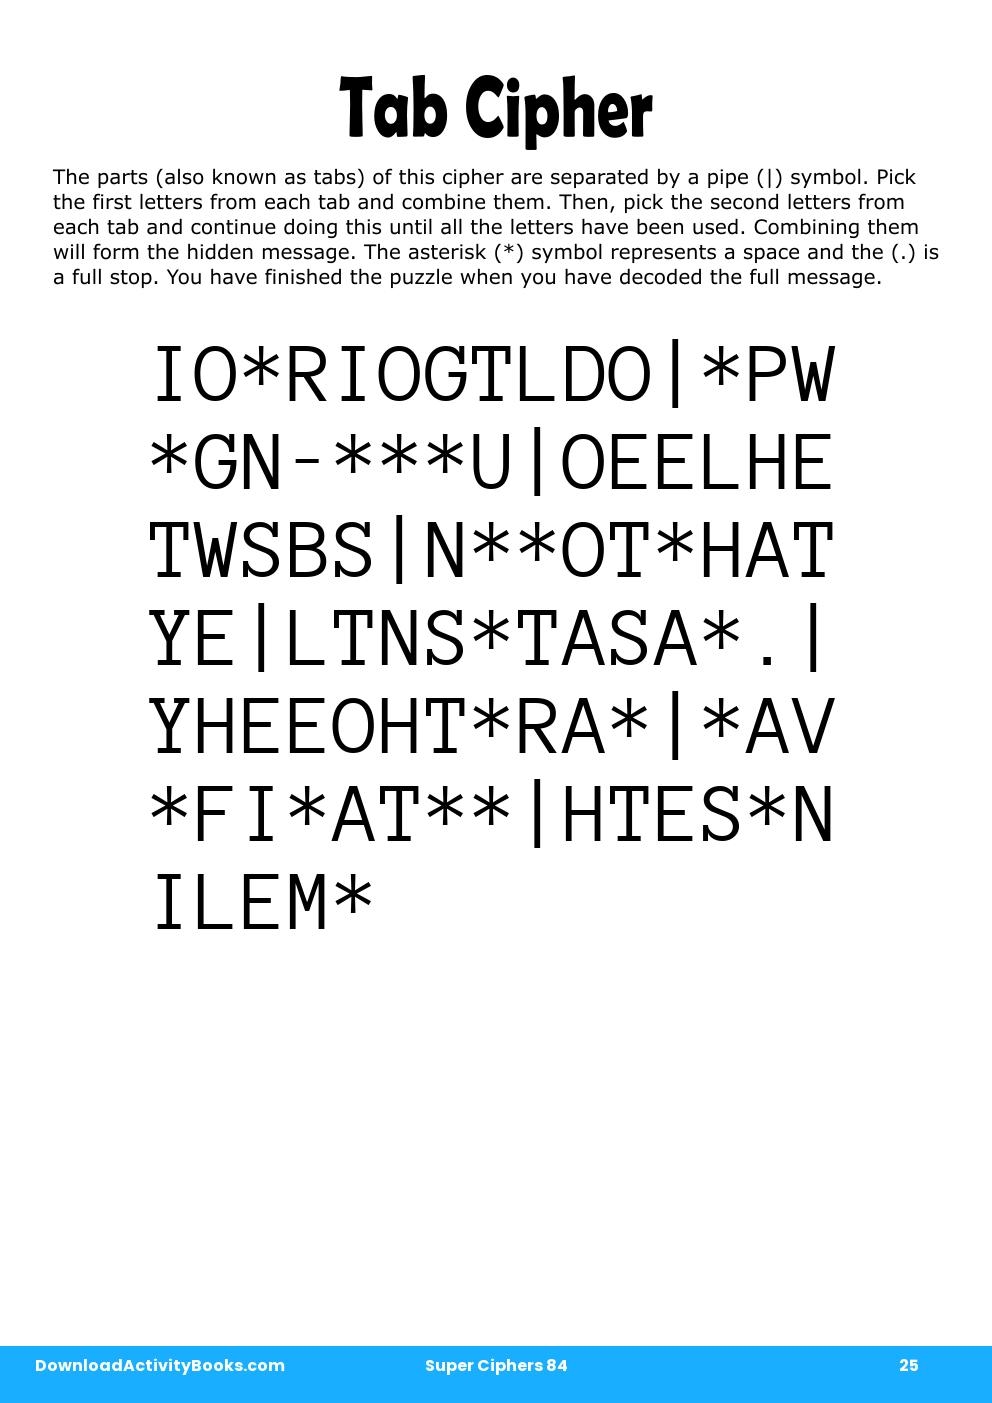 Tab Cipher in Super Ciphers 84